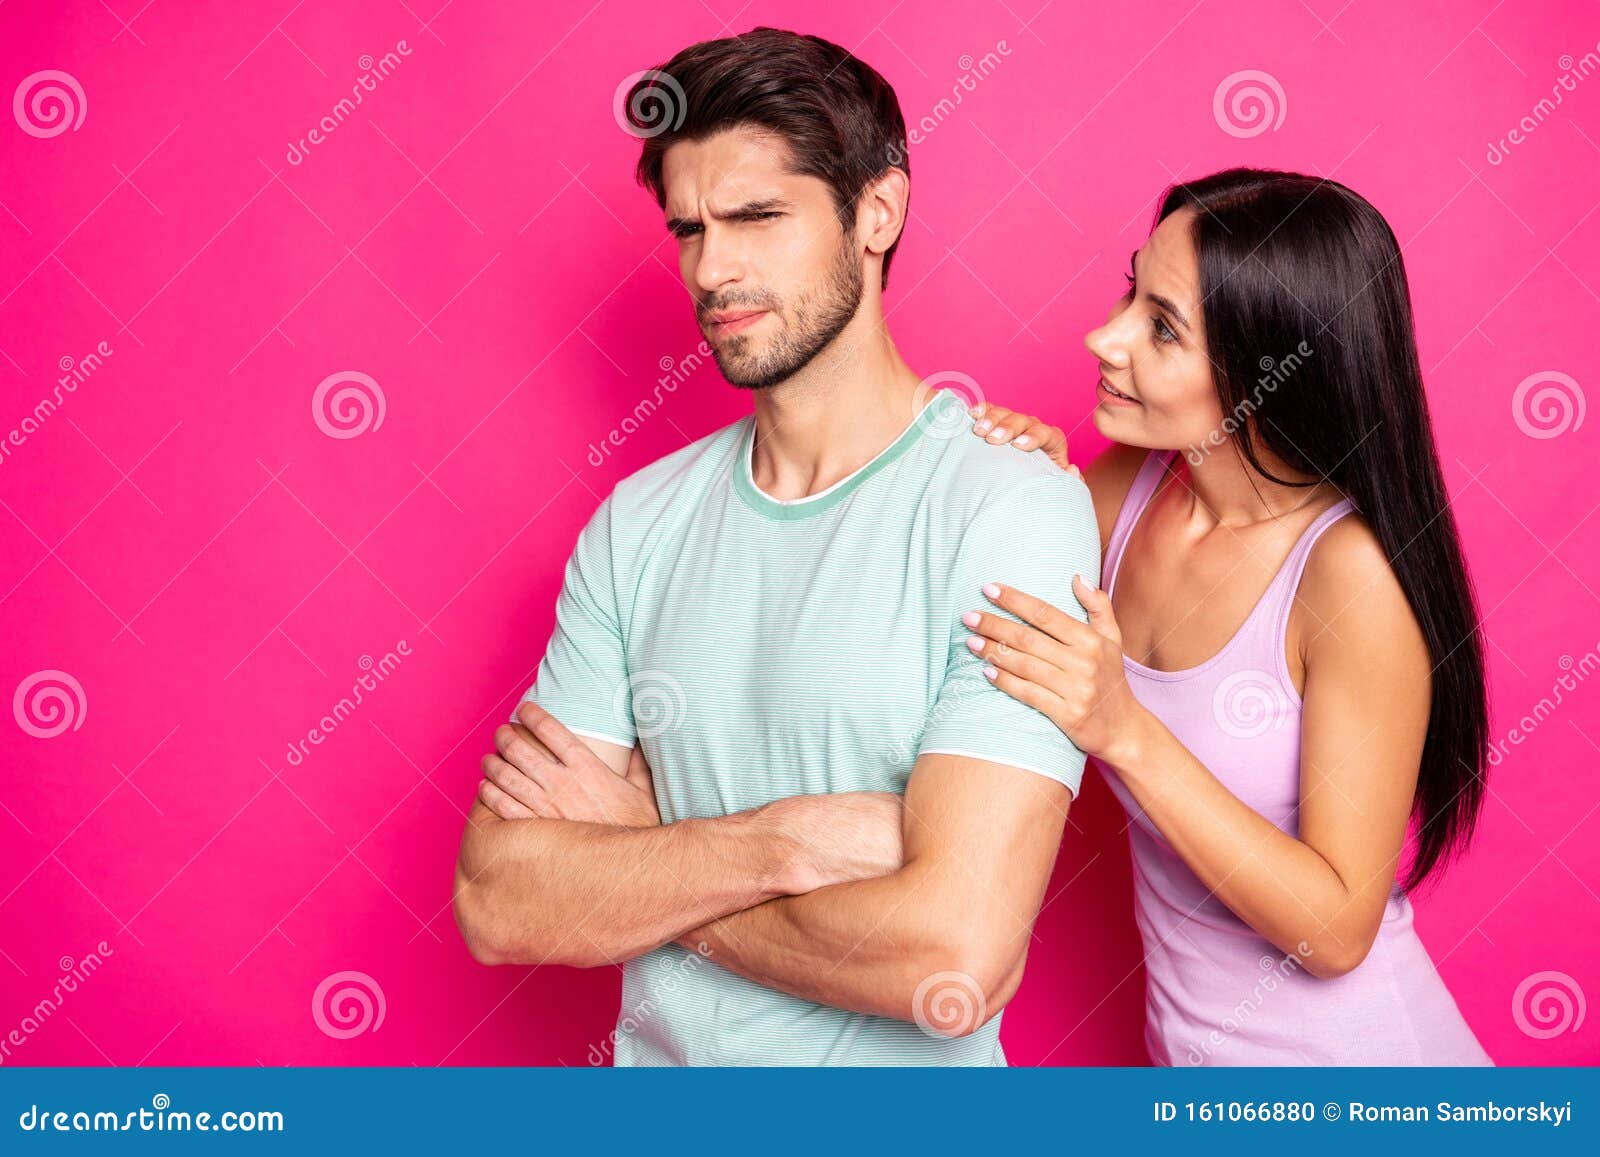 Photo of Funny Couple Guy Blaming Lady in Cheating Standing Angry and Mad Waiting Apologizing Wear Casual Clothes Stock Photo